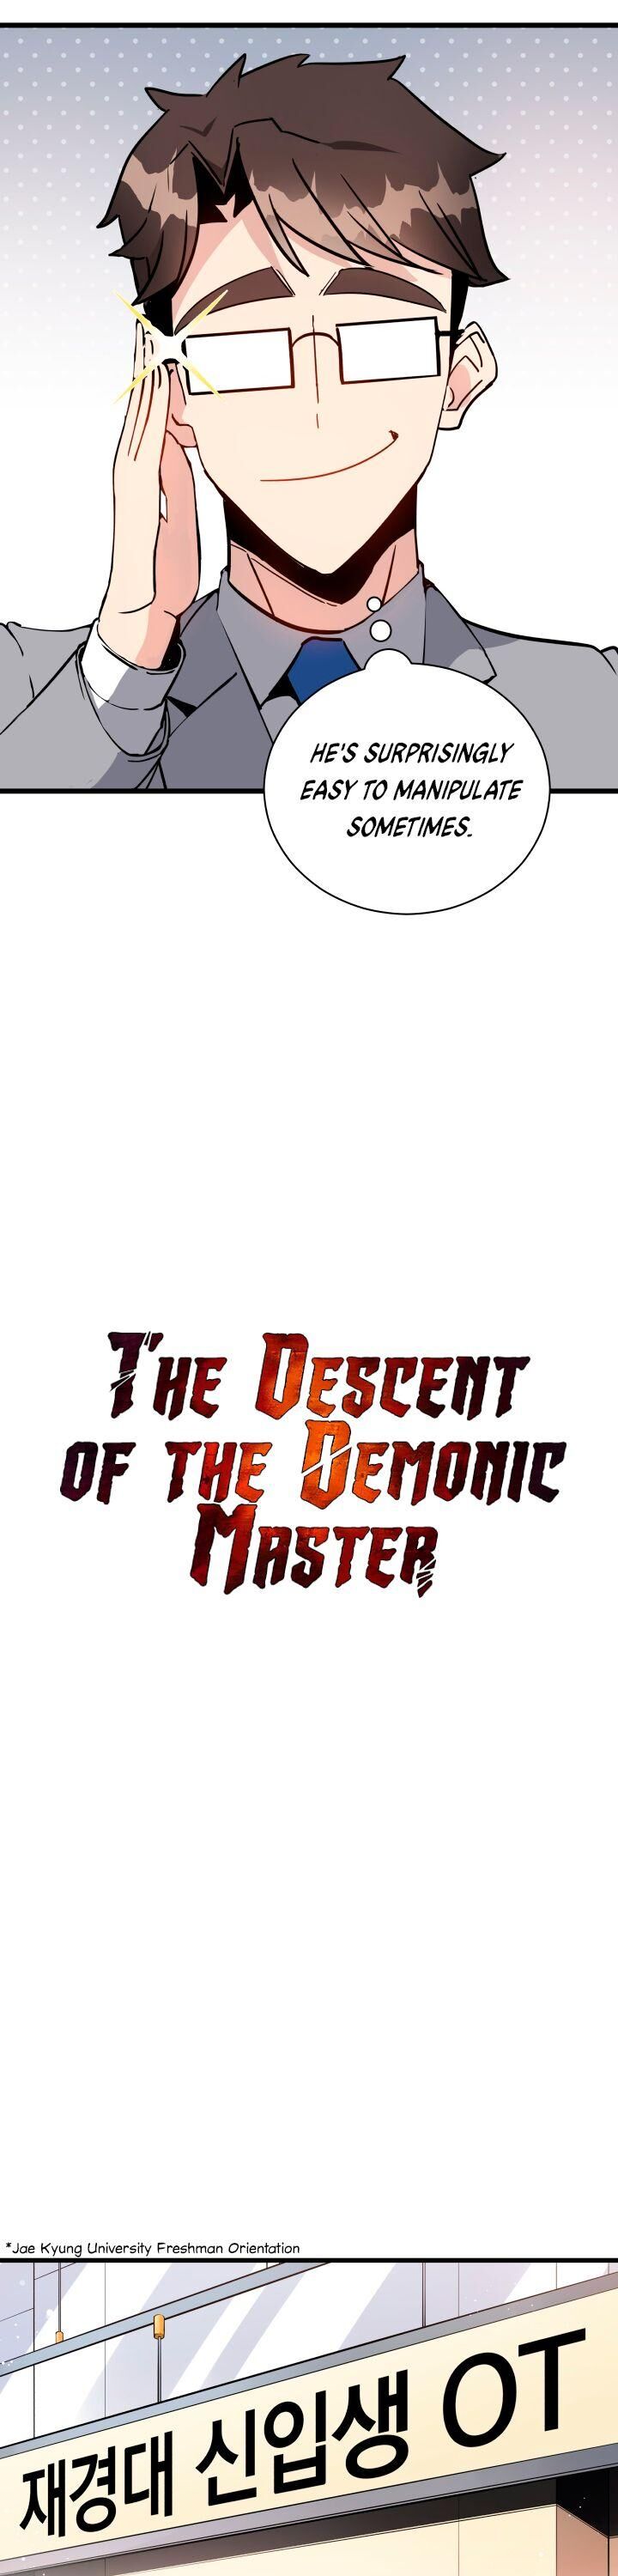 the_descent_of_the_demonic_master_35_7